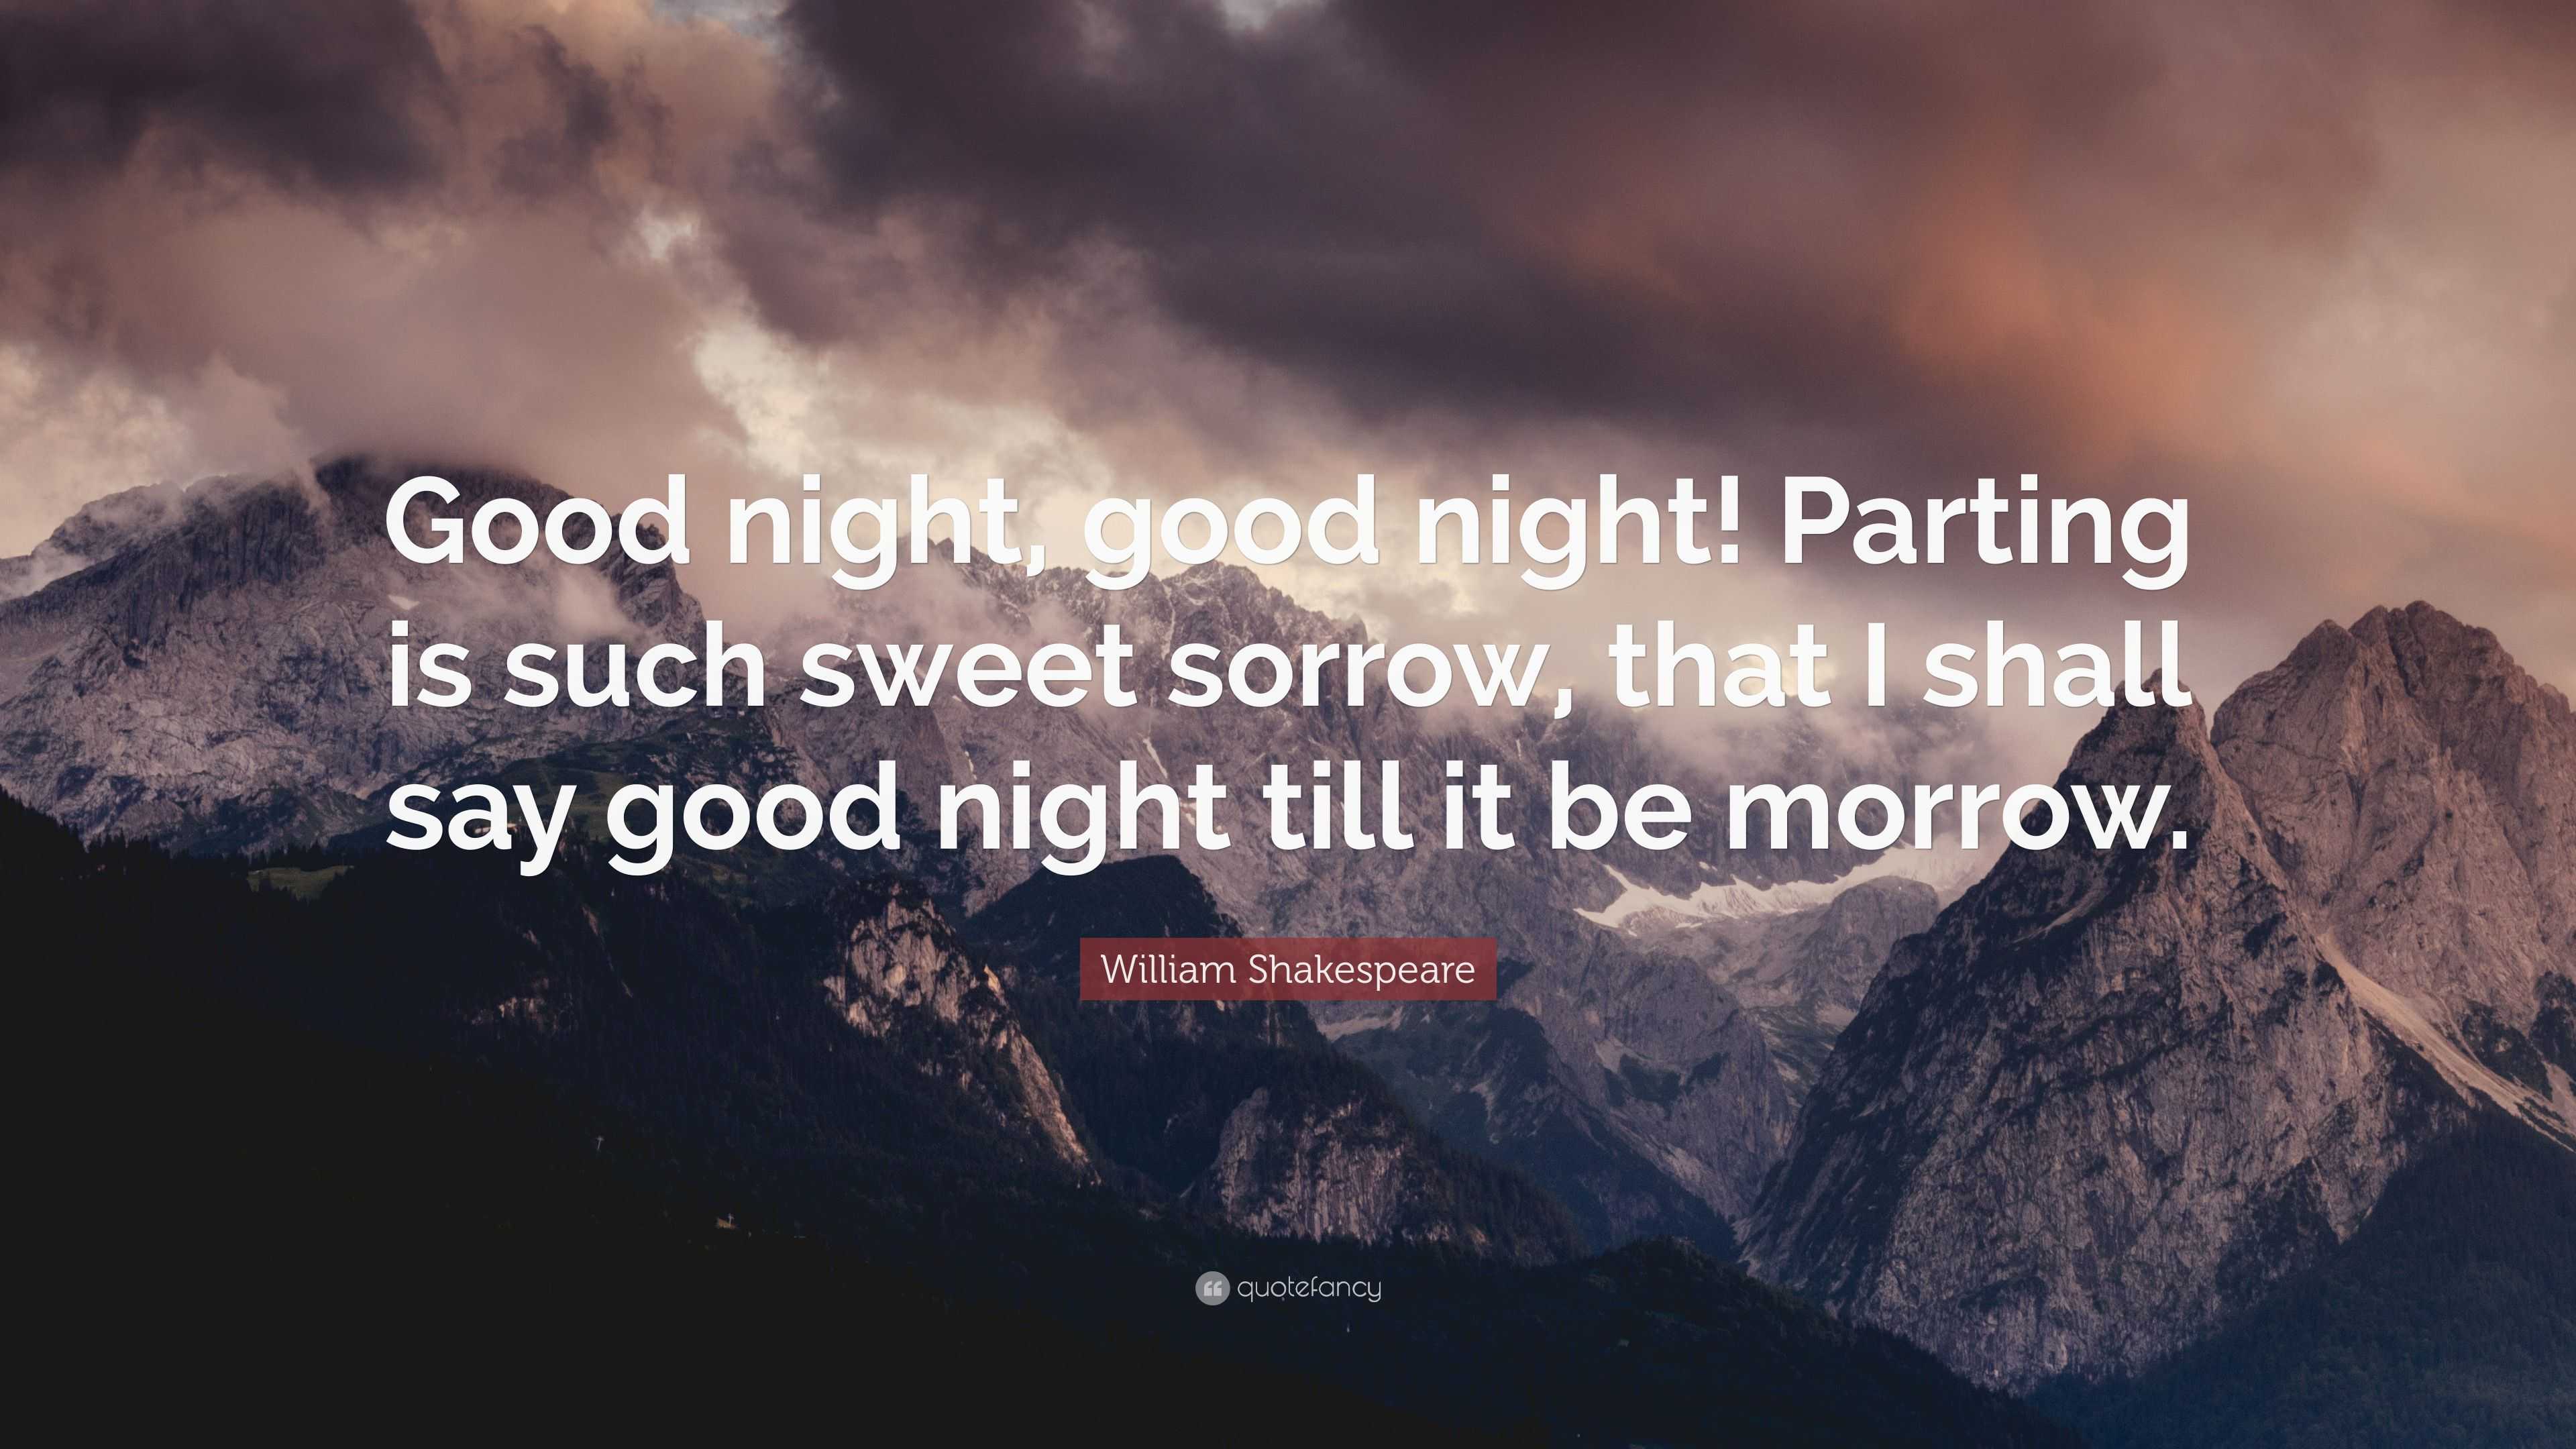 William Shakespeare Quote “Good night good night Parting is such sweet sorrow